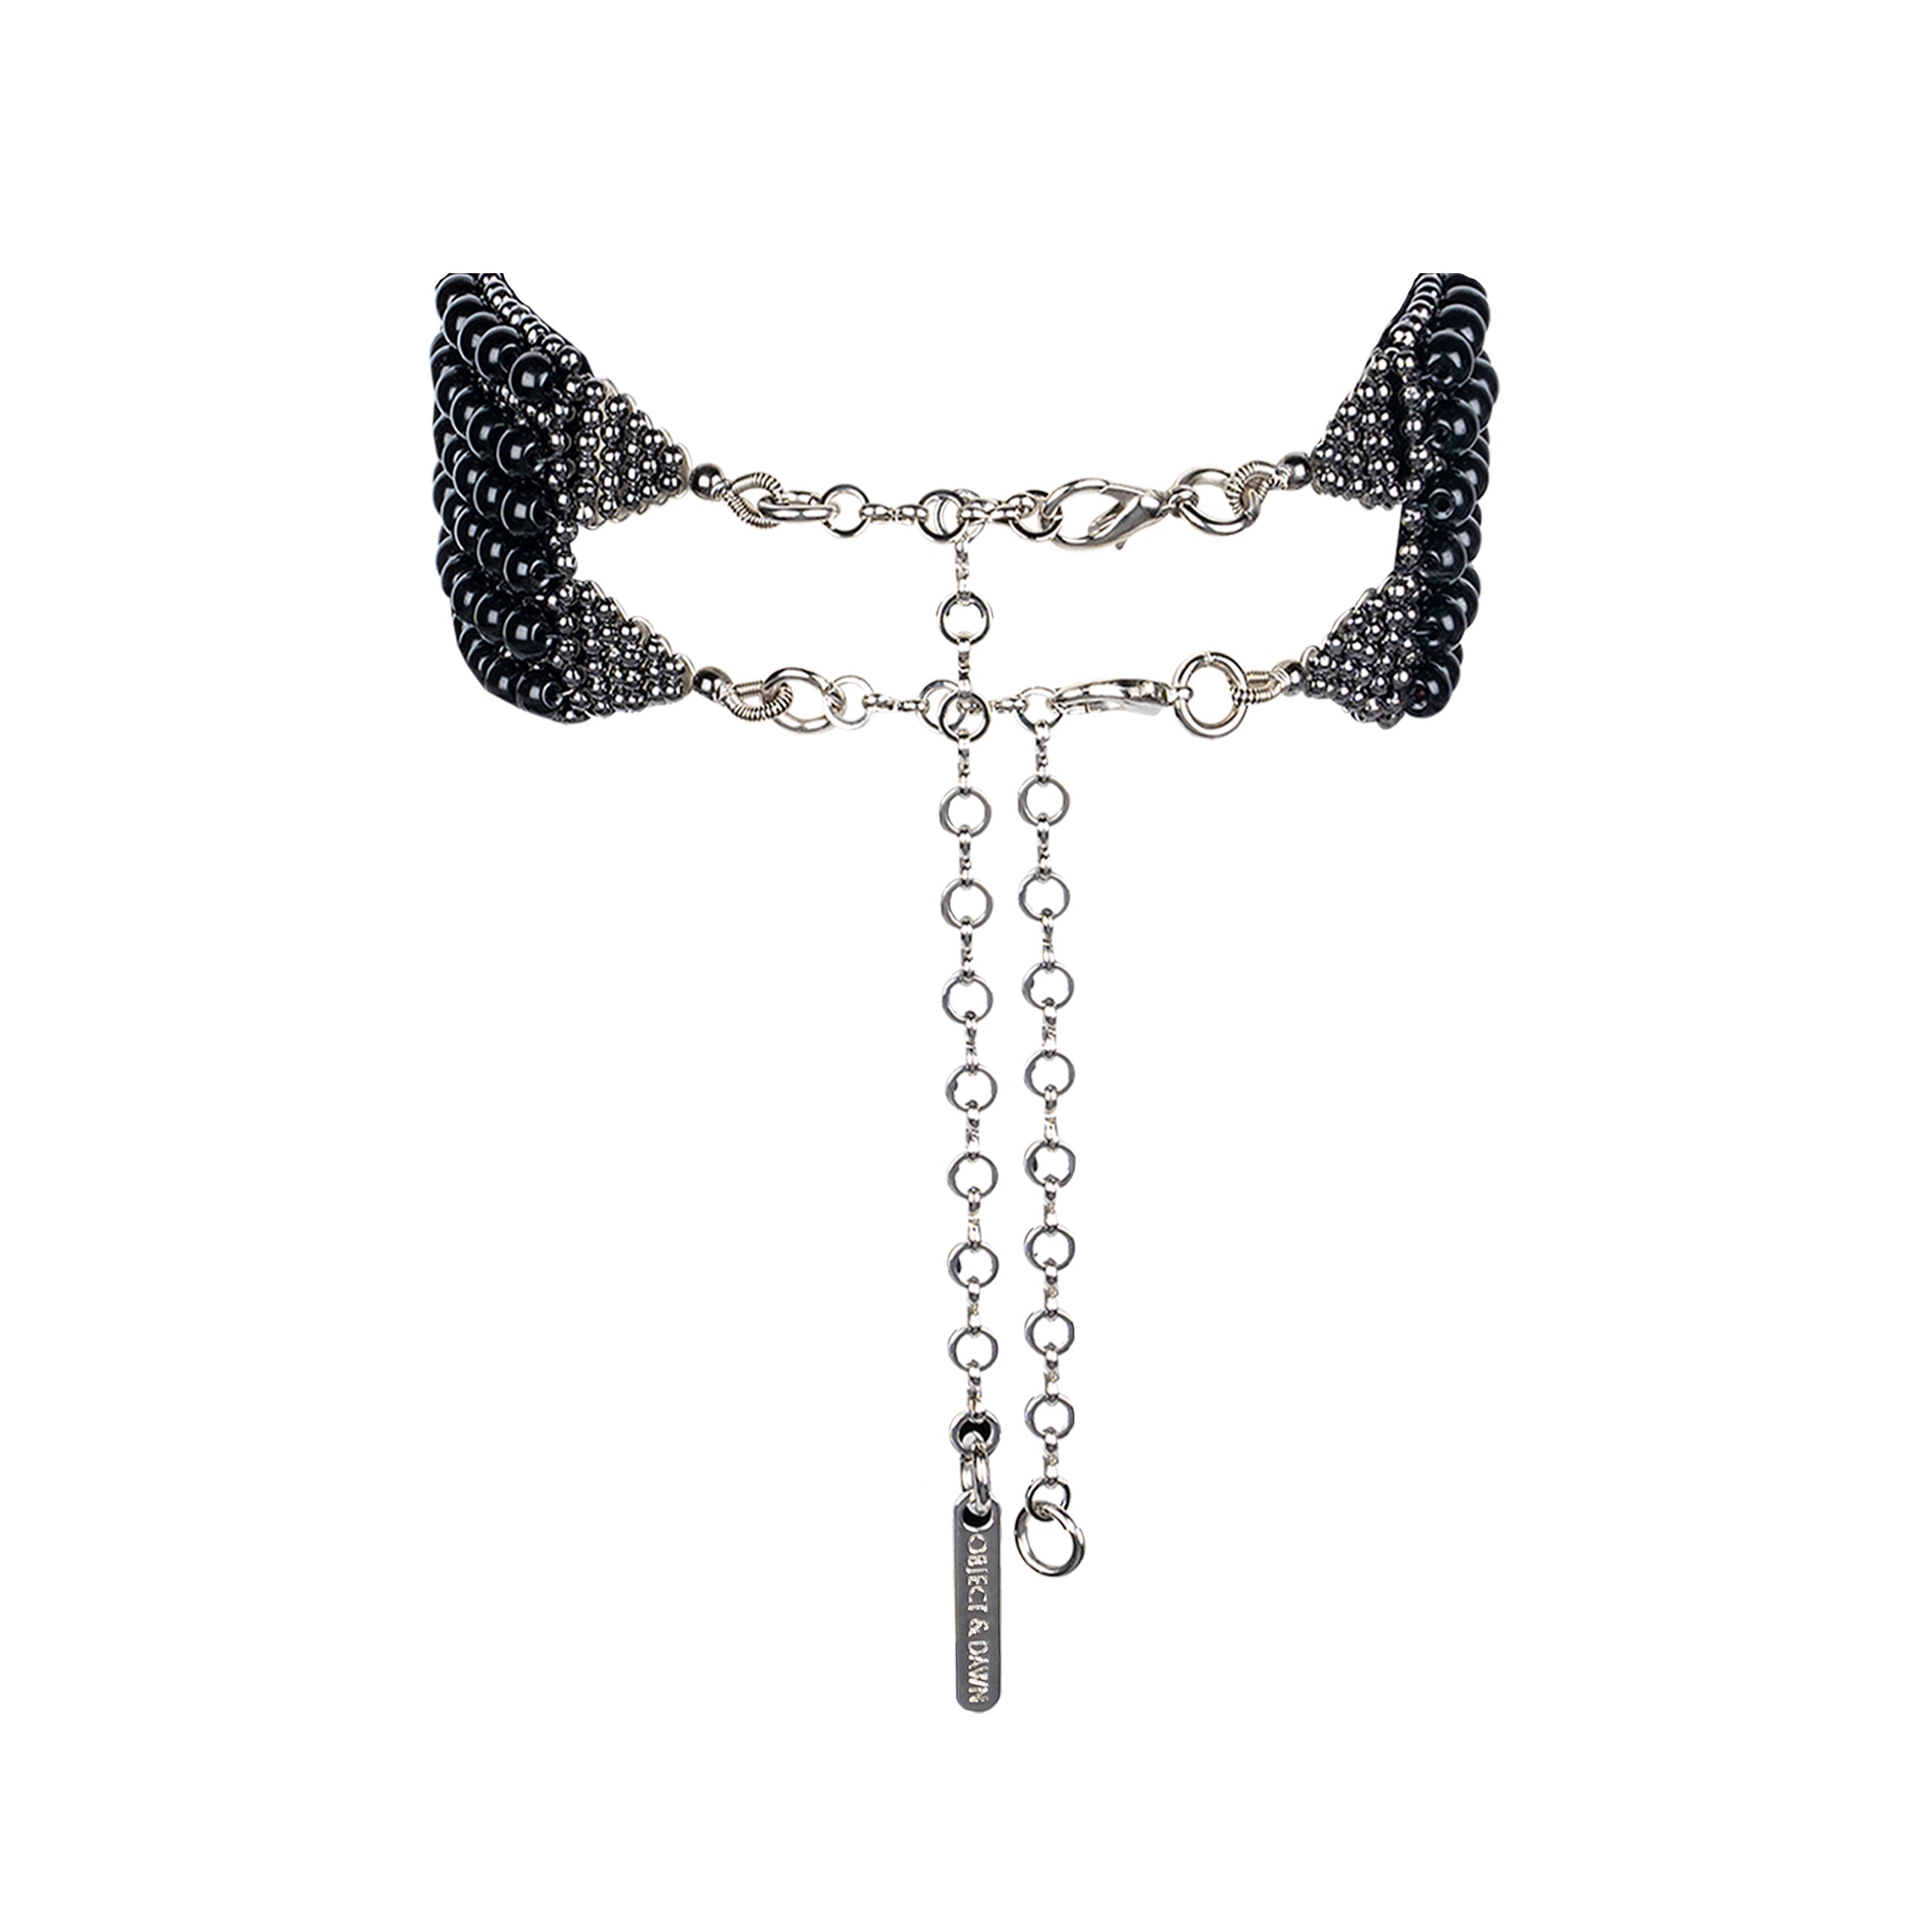 Elohim T-Choker by Object and Dawn constructed entirely by hand with intricate black glass beads and high-quality, gunmetal-plated brass beads that are coated in polymer to preserve shine and ensure the item is hypoallergenic.  Ethically made with secret ancient techniques by our skilled artisans, each piece takes several days to make. Fully lined by hand in velvet for your ultimate comfort.